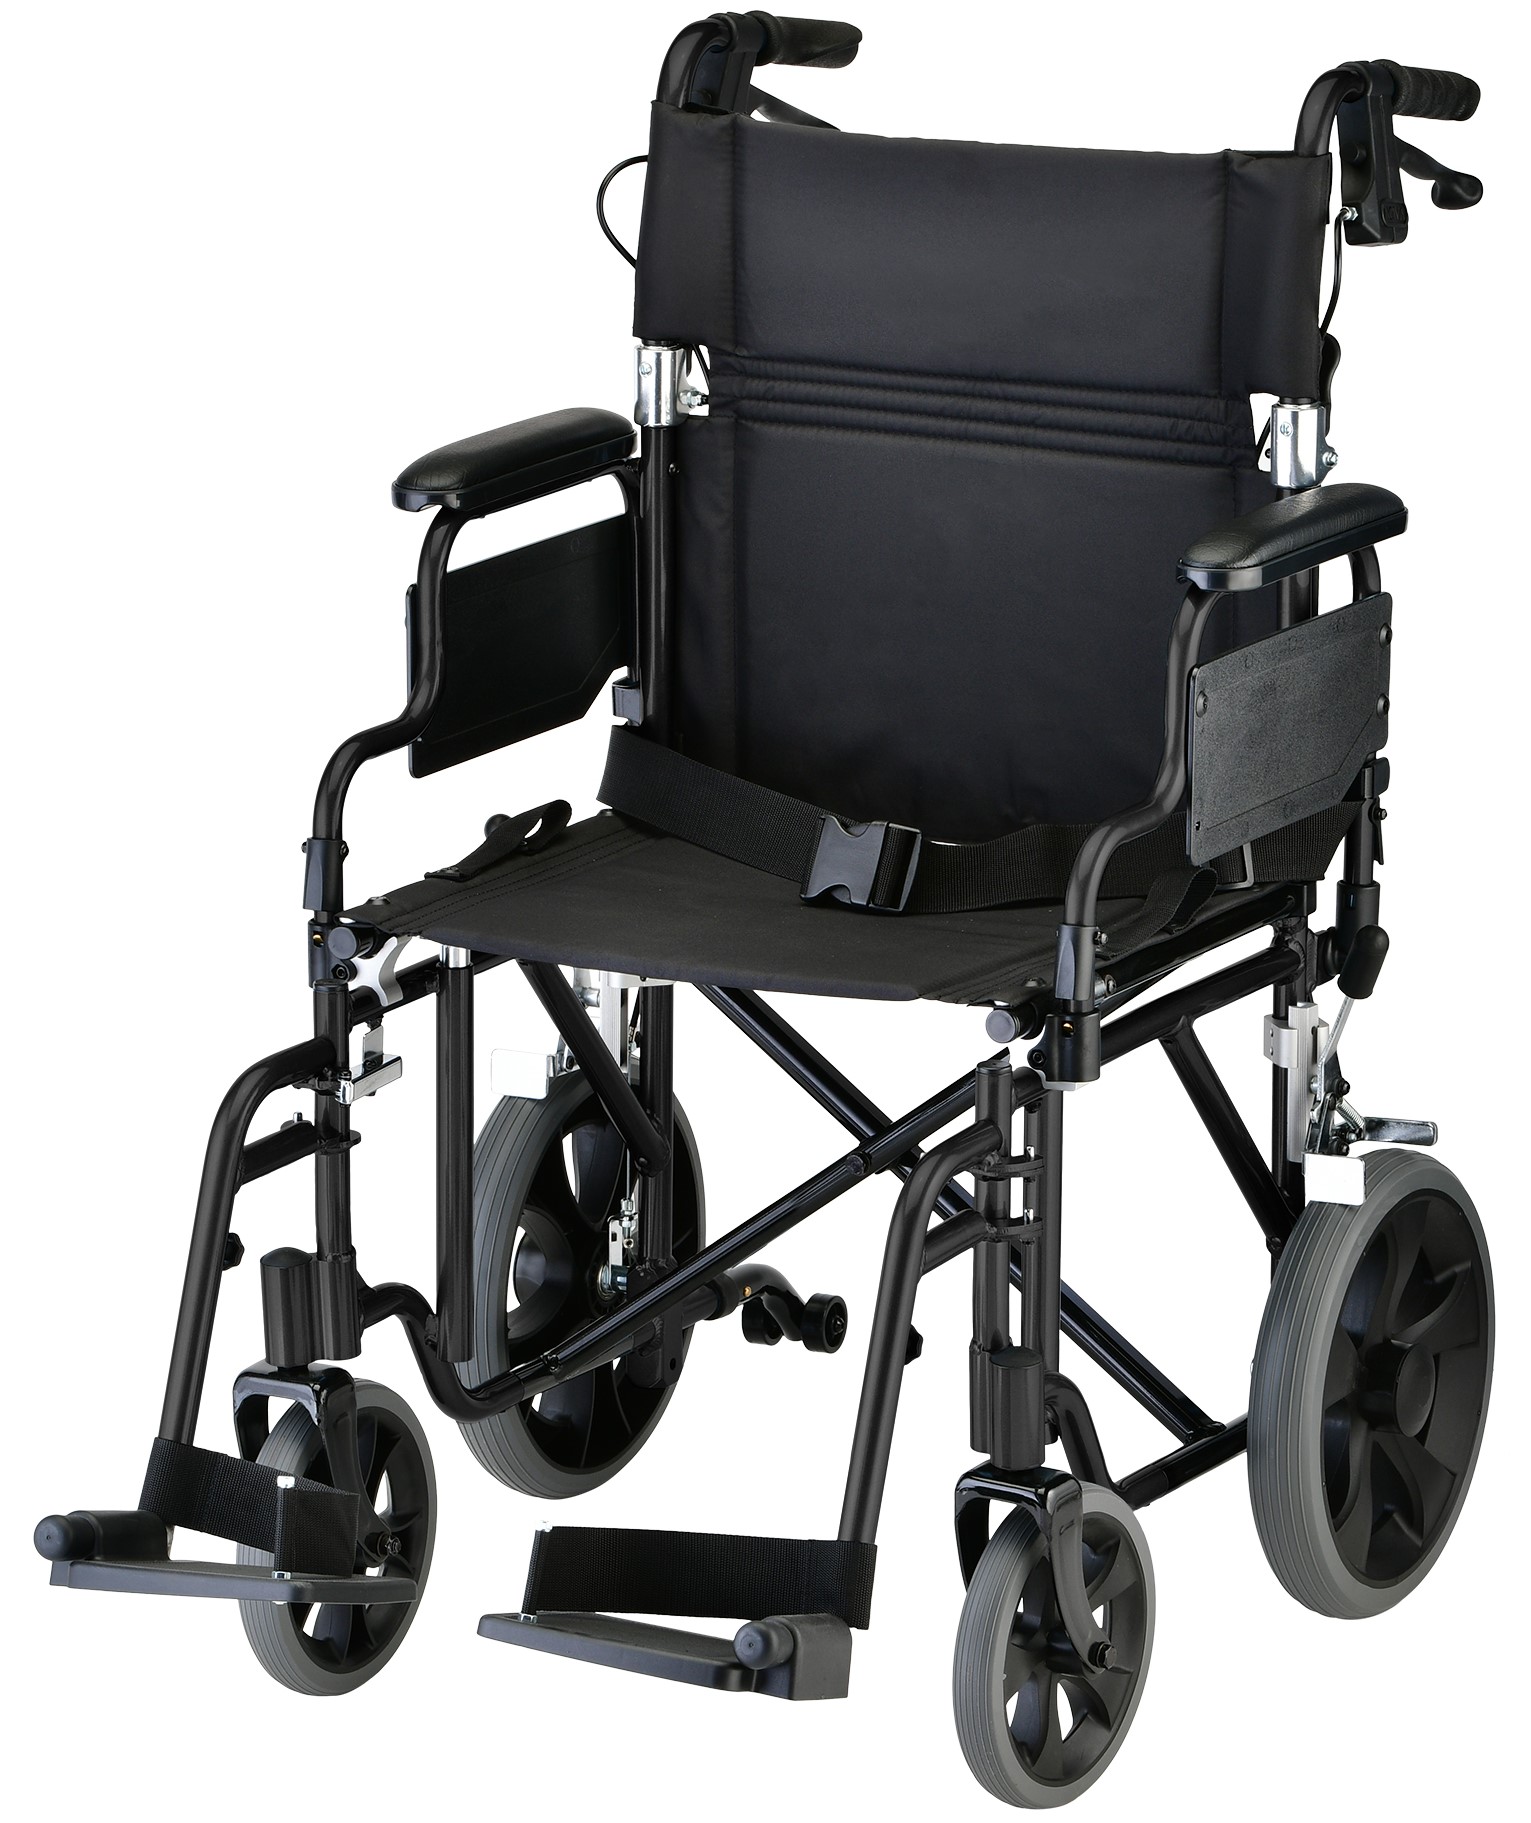 19 inch Transport Chair with 12″ Rear Wheels